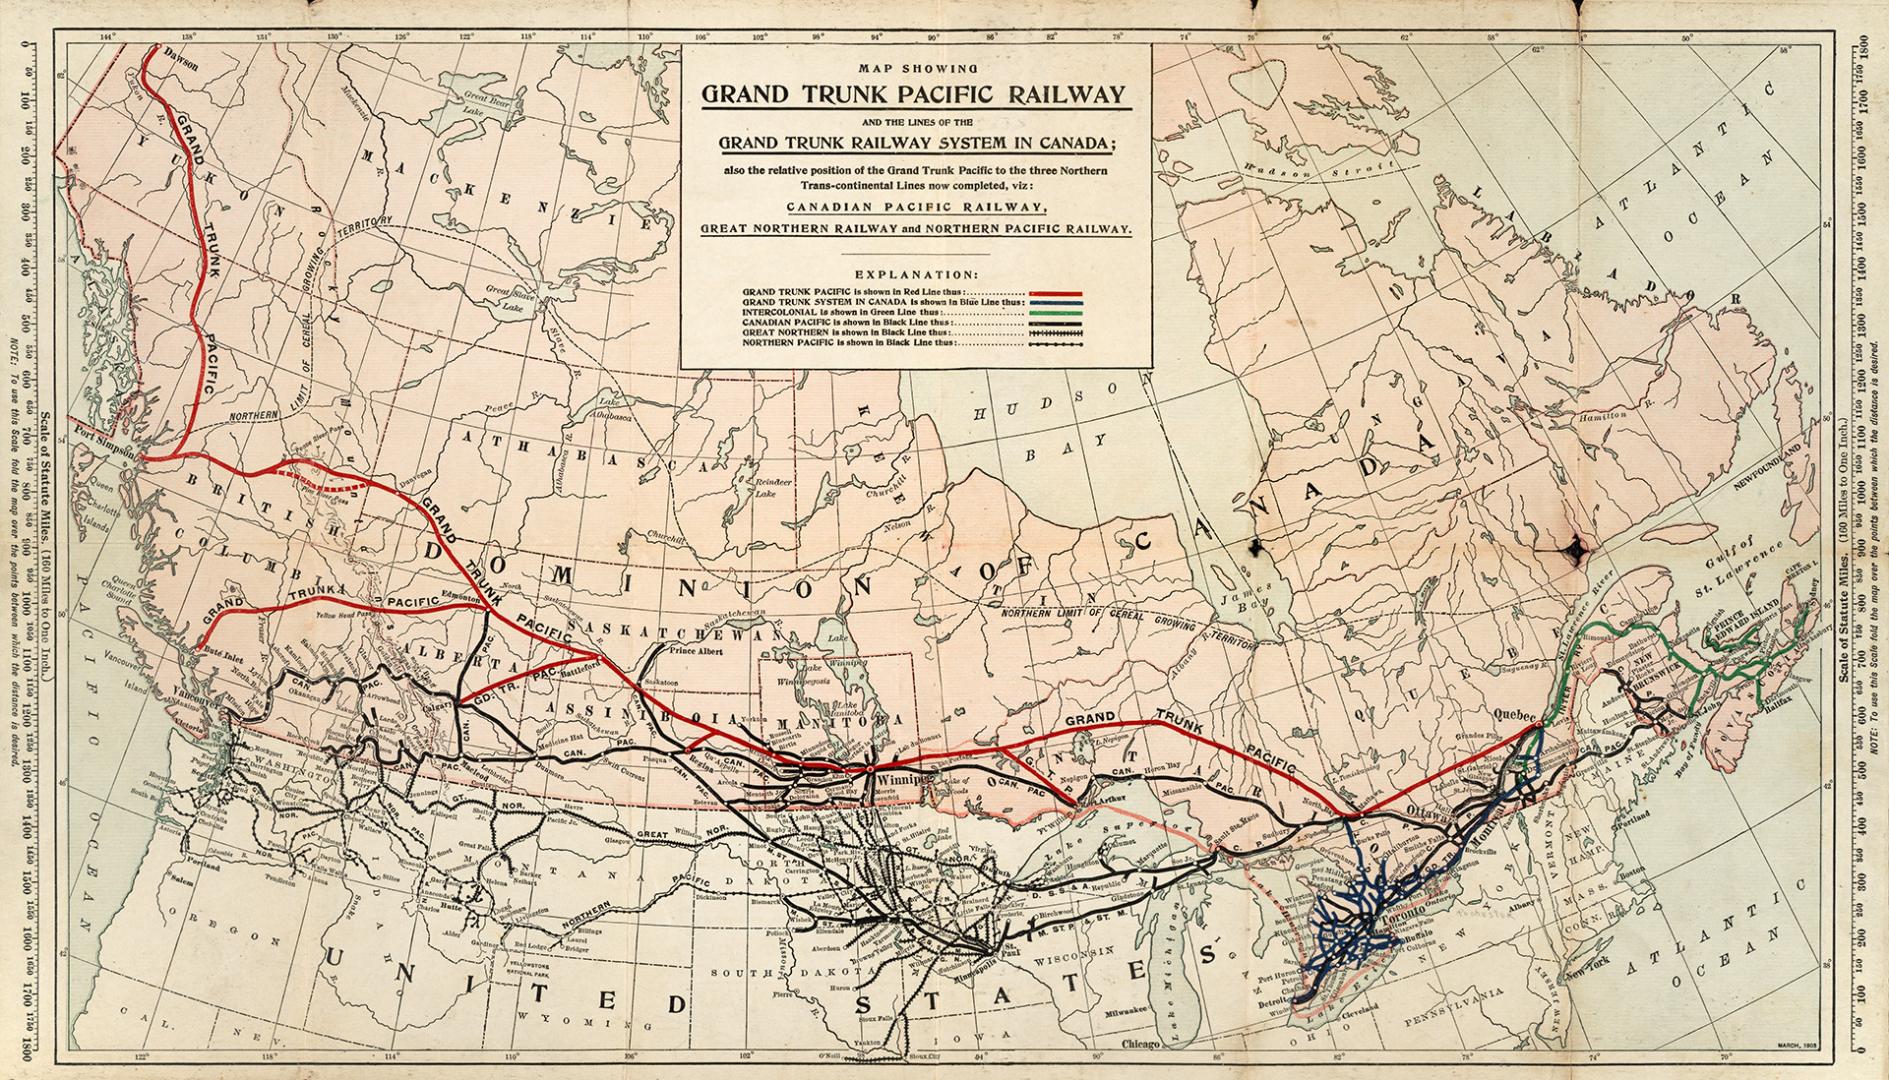 Map showing Grand Trunk Pacific Railway